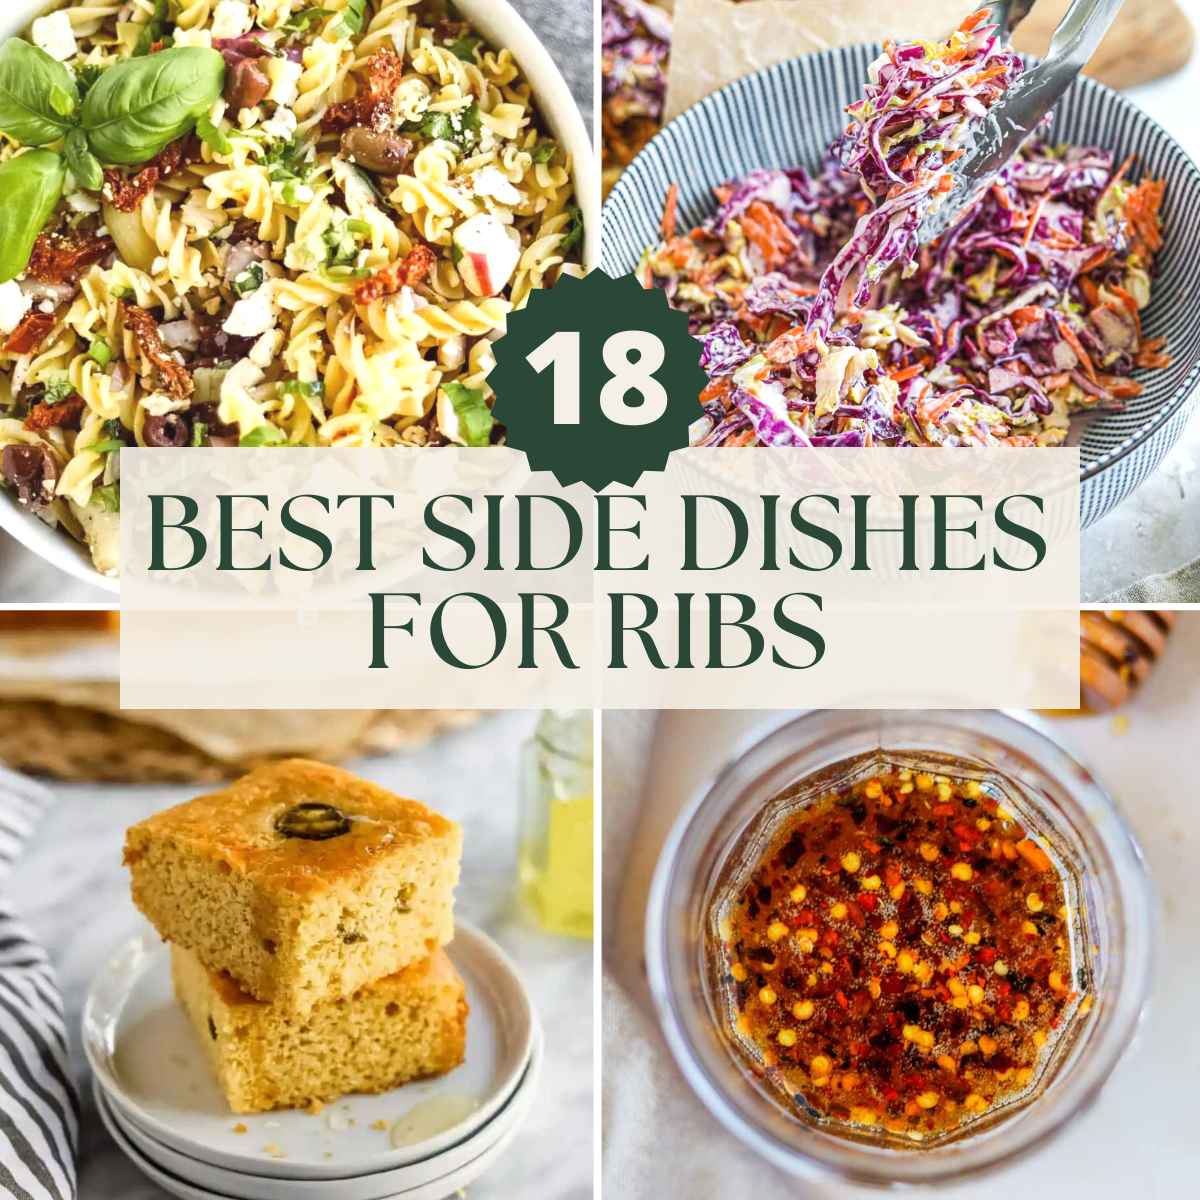 Best side dishes for ribs, including pasta salad, coleslaw, cornbread, hot honey, and more.